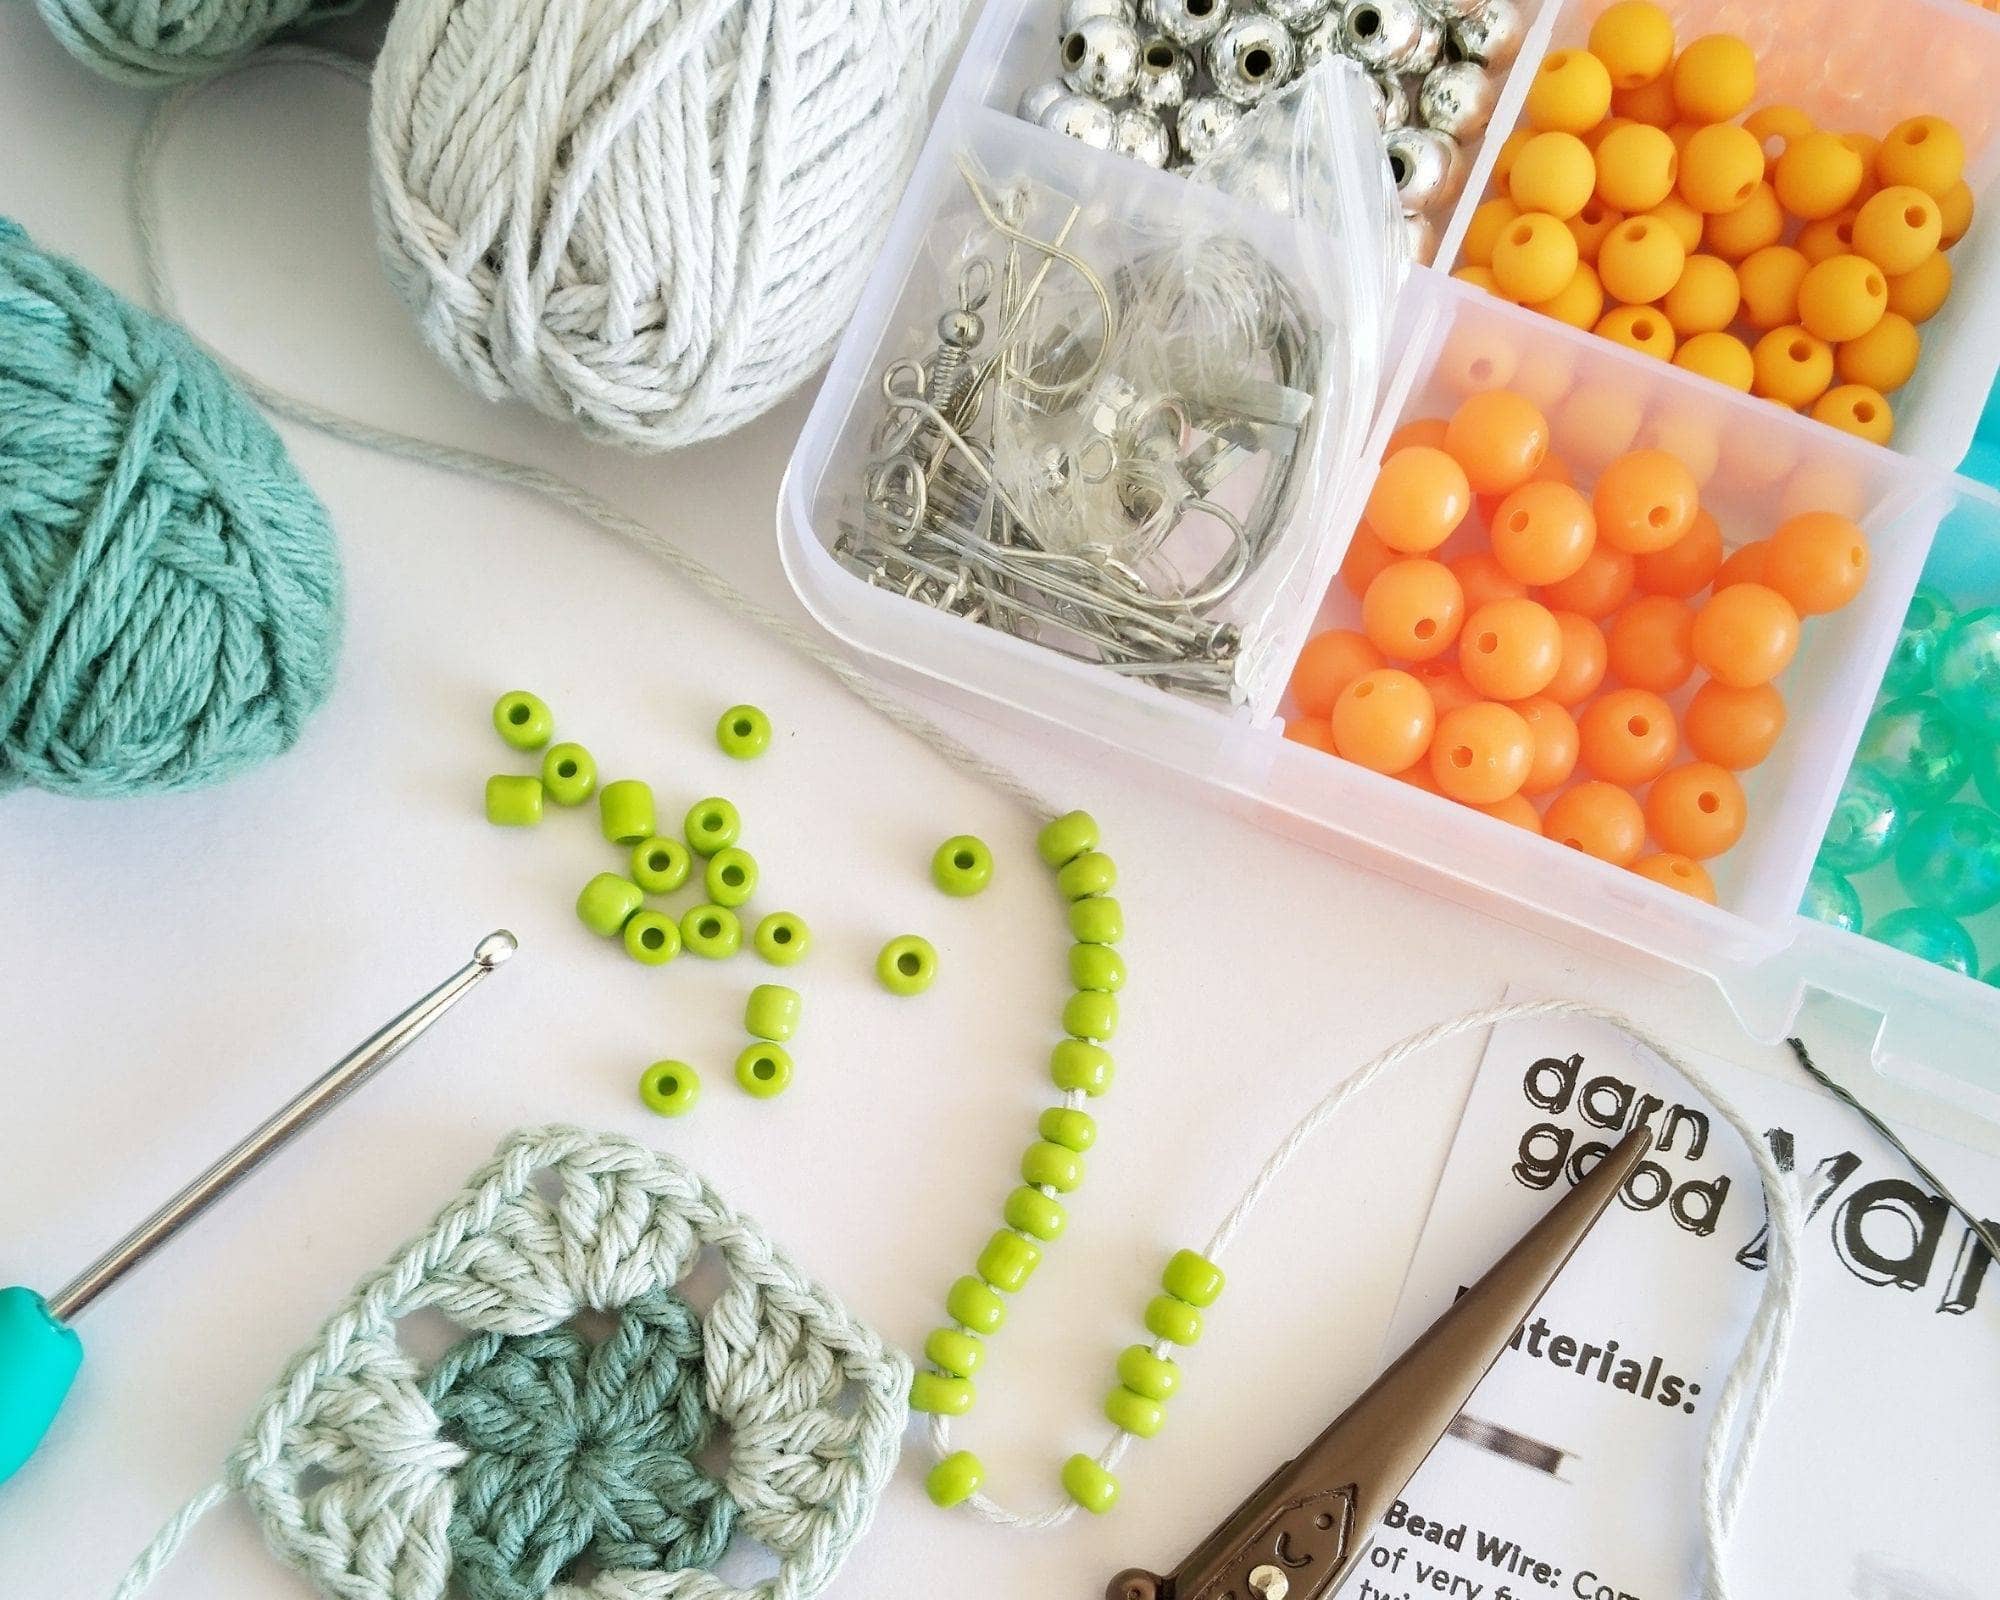 Darn Good Yarn Bead Kit for Jewelry Making - Ethically Sourced Yarn, Craft Kits, Home Goods, Clothing & Accessories